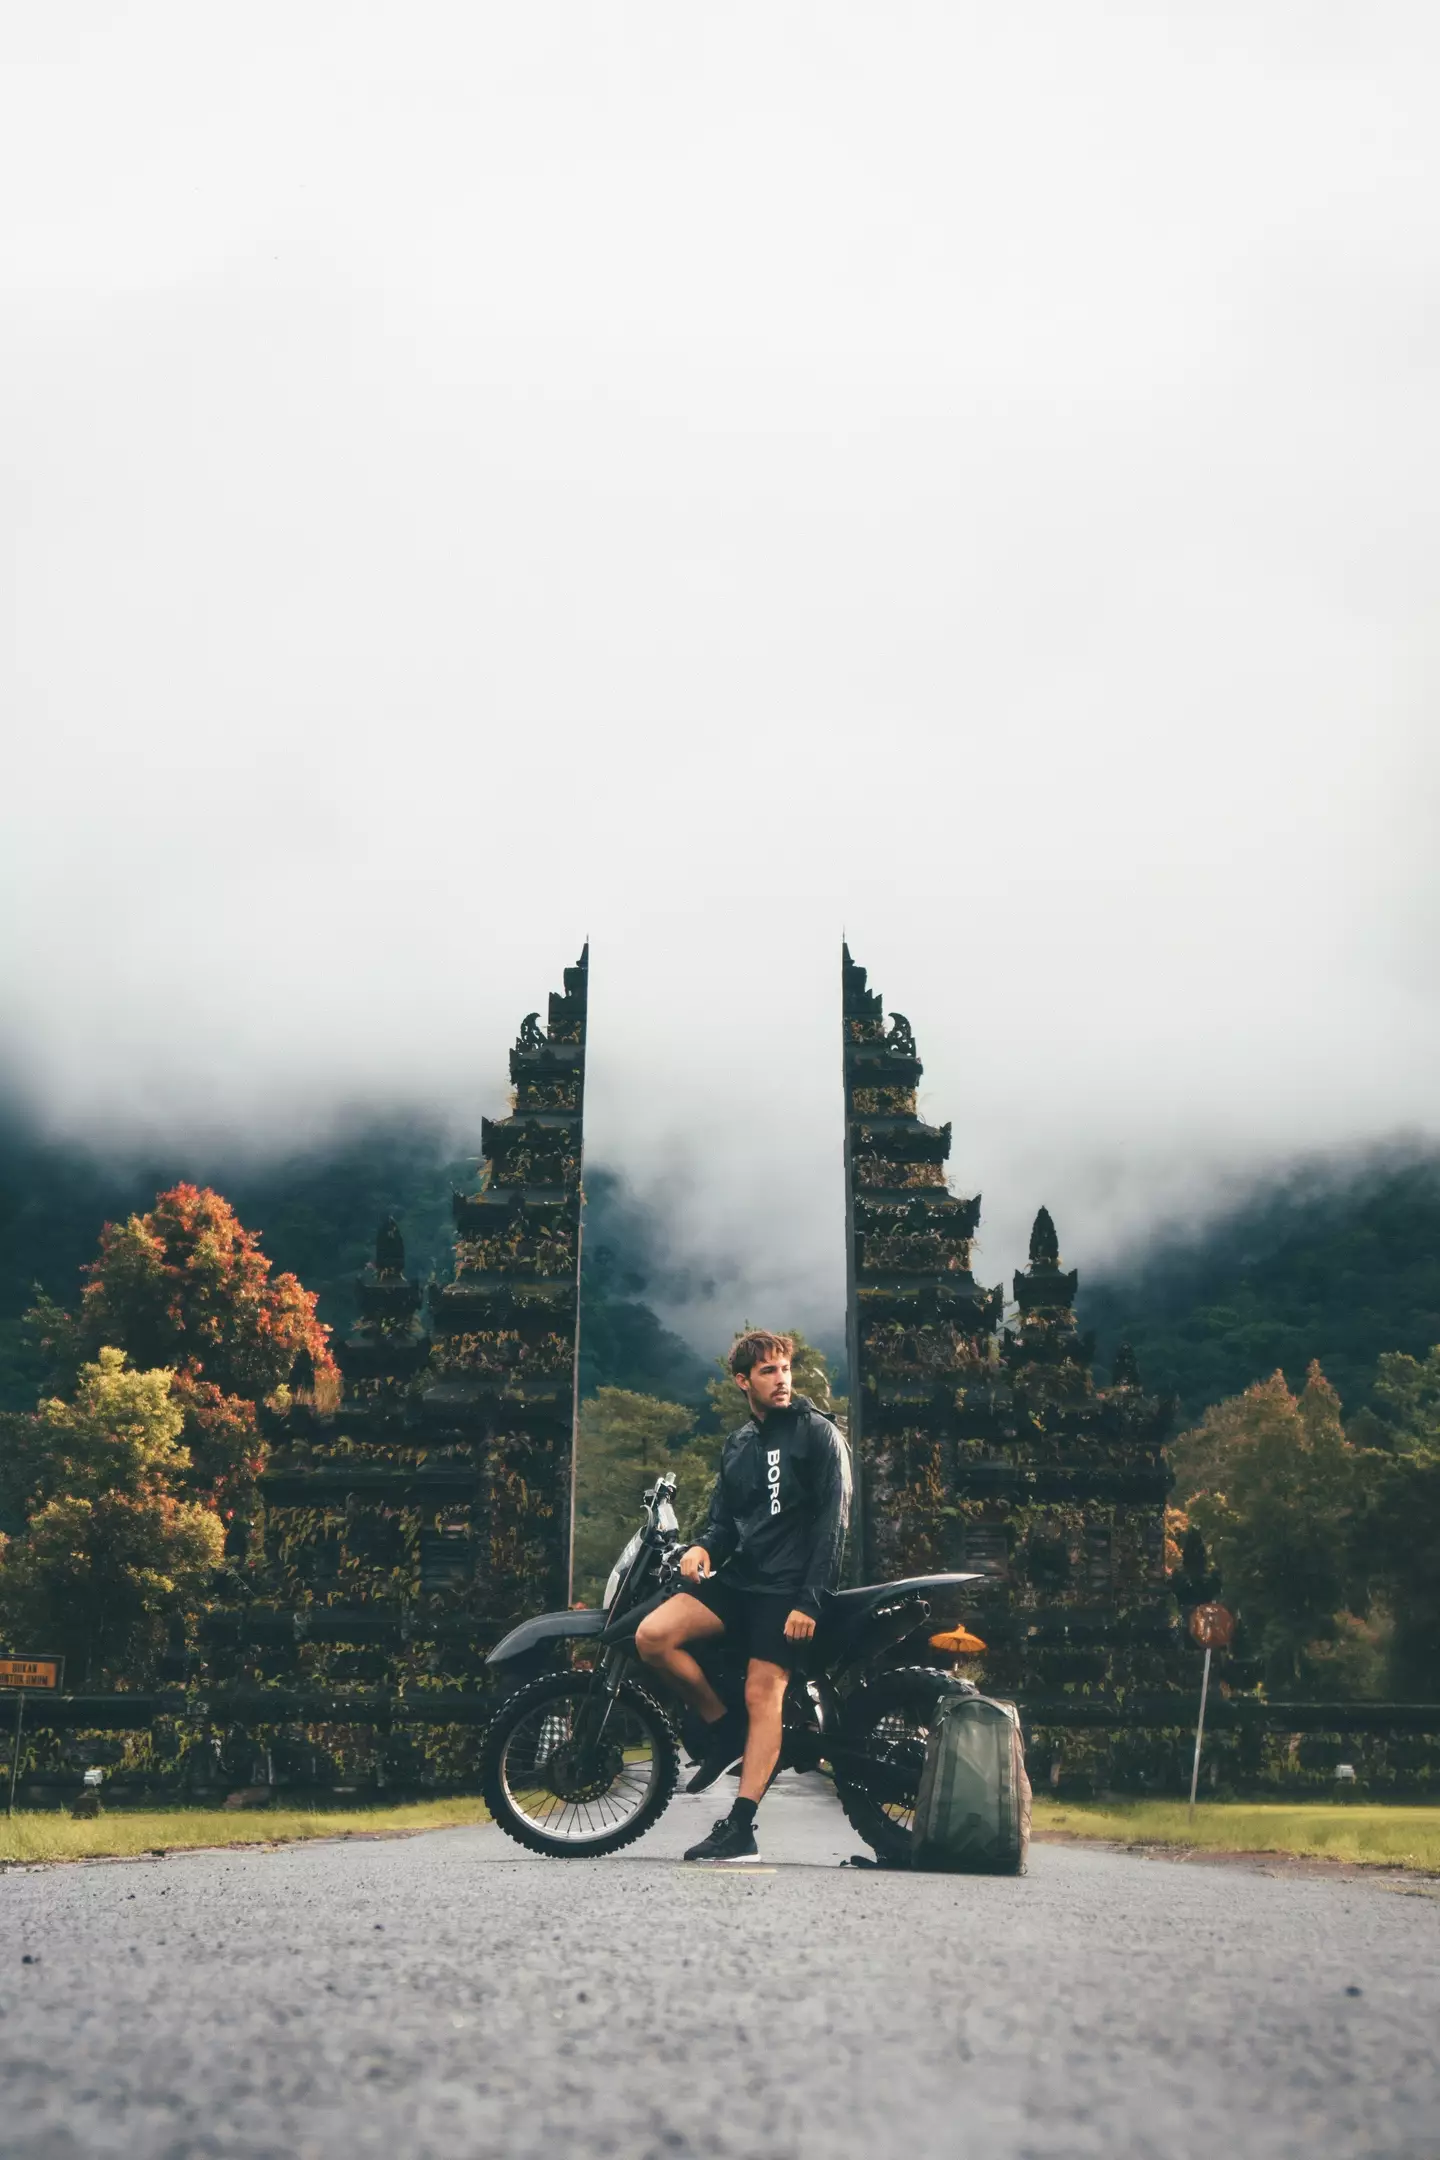 Visiting the Island of the Gods and travelling by motorbike will soon be a thing of the past.